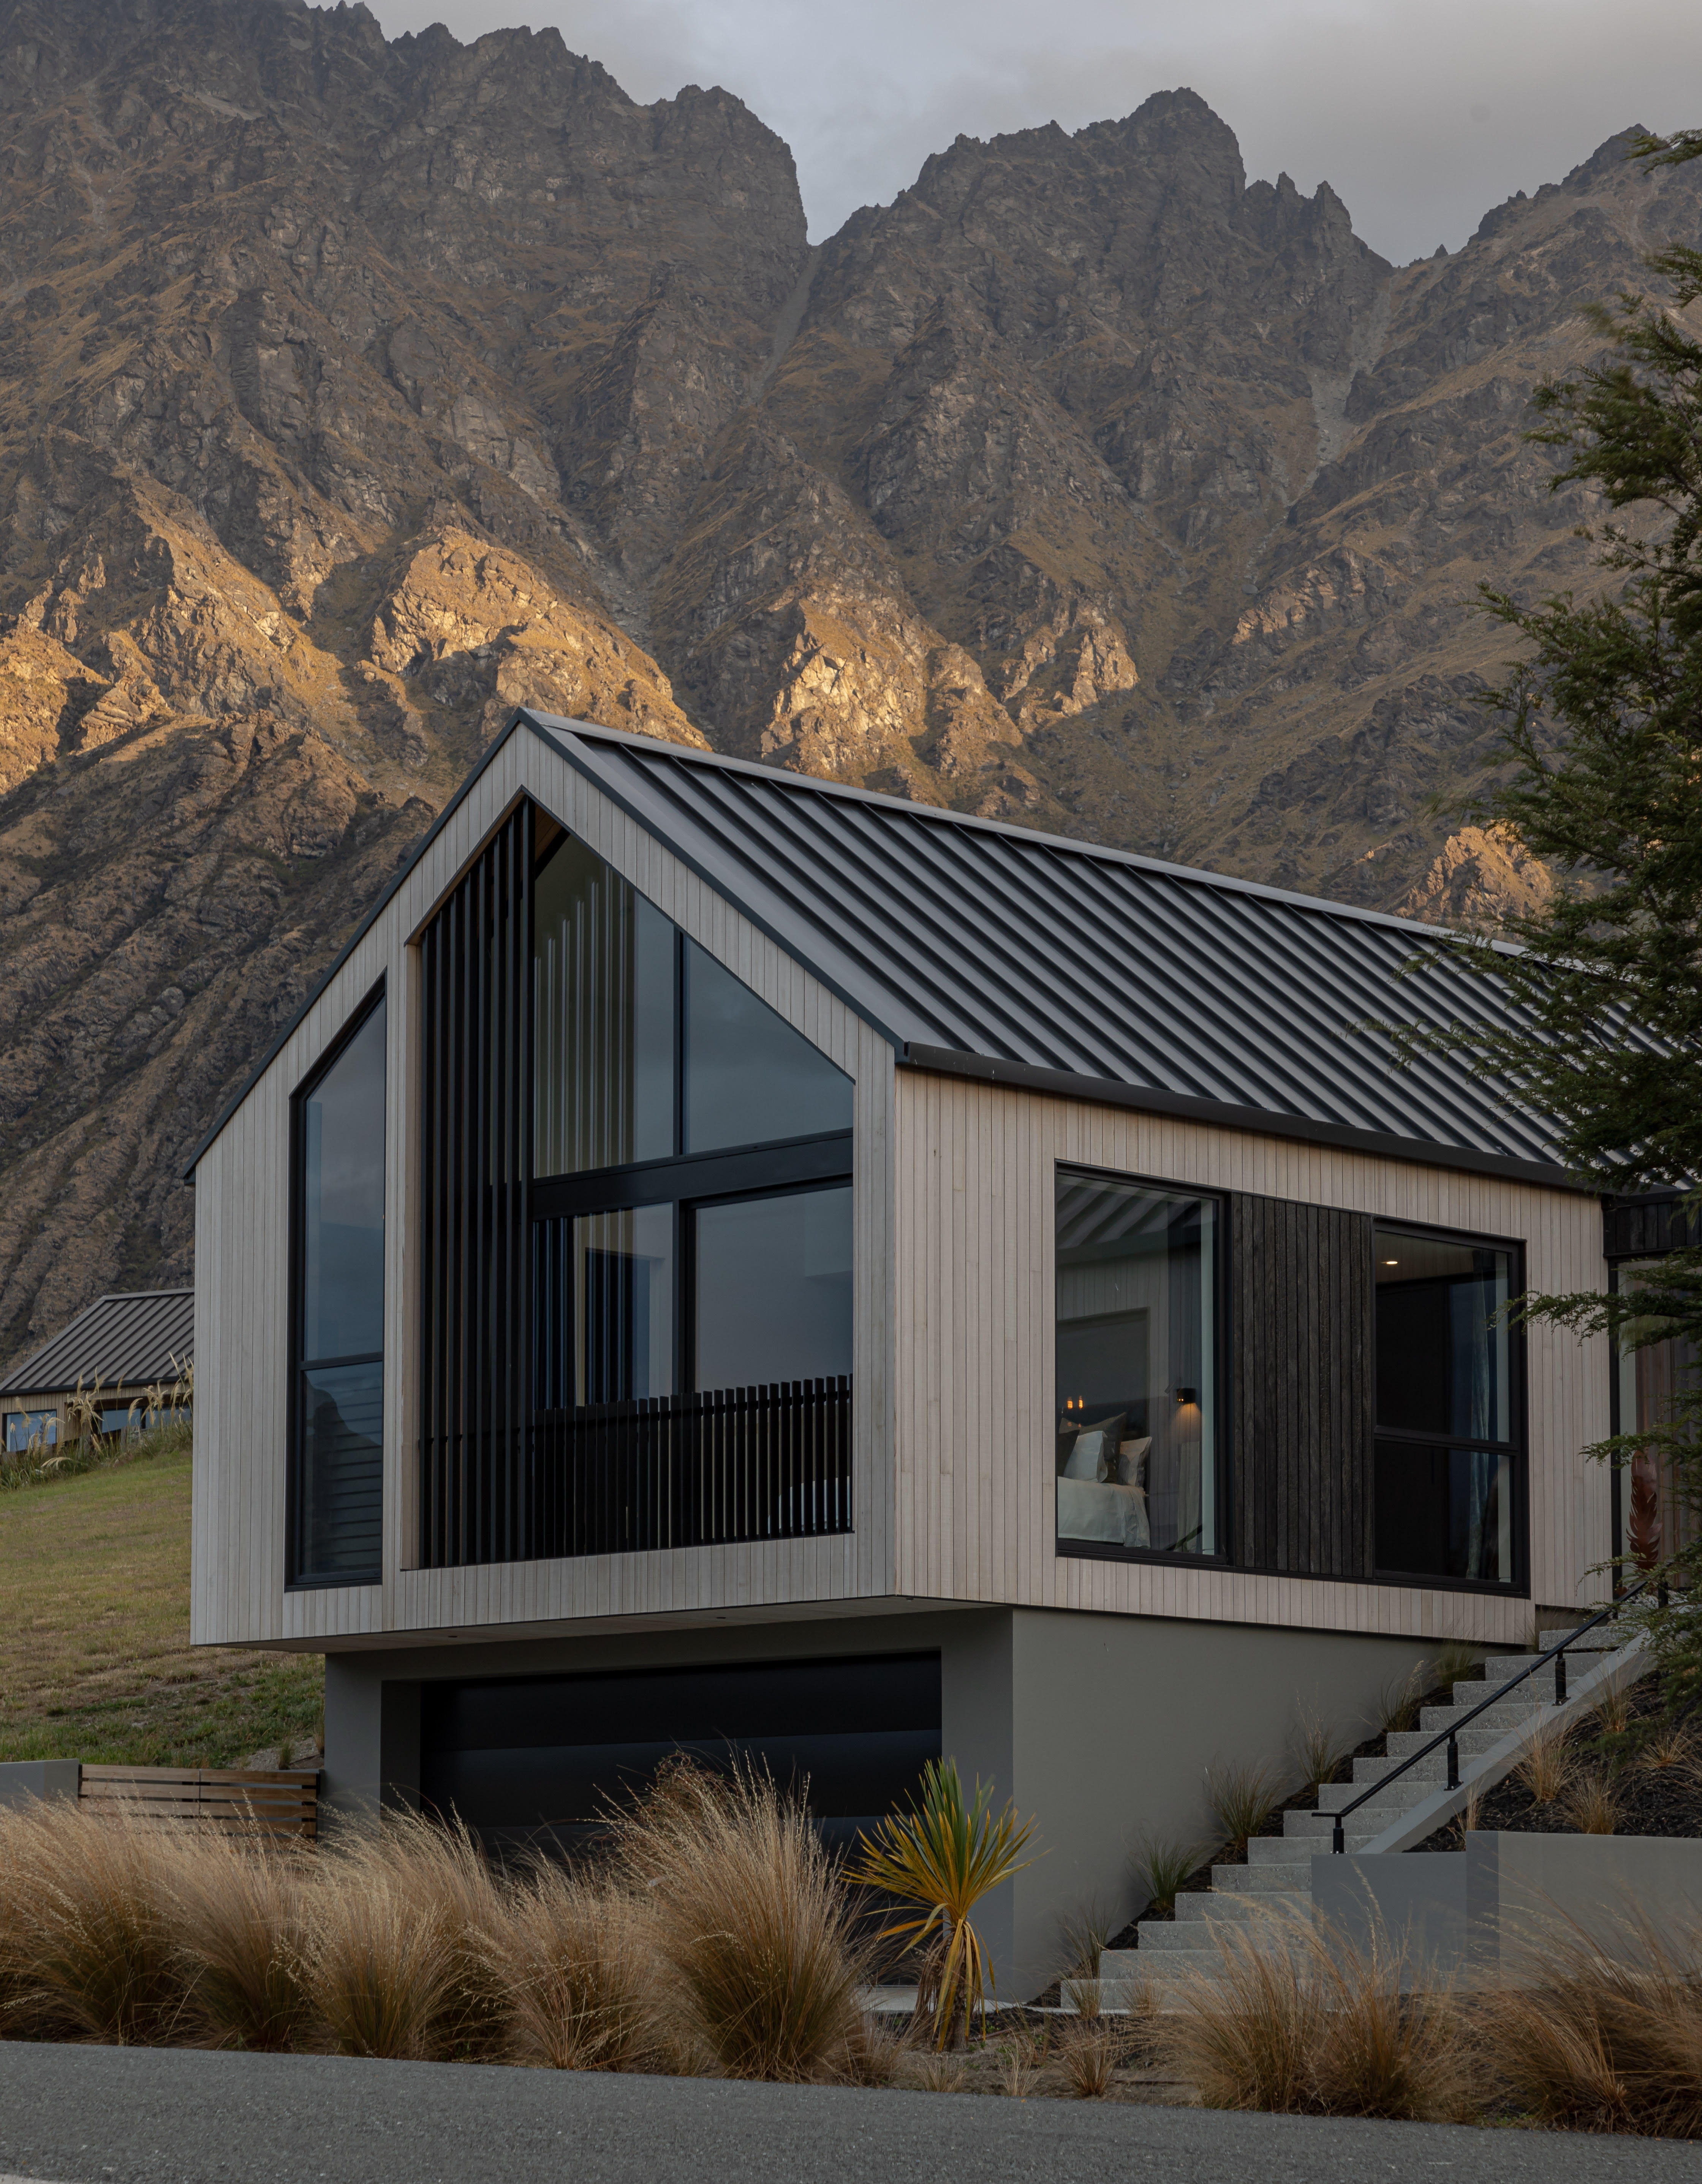 Vertical timber cladding used in this home designed by Ben Hudson Architects creates crisp lines accentuating the dramatic alpine setting. Image by John Williams. 